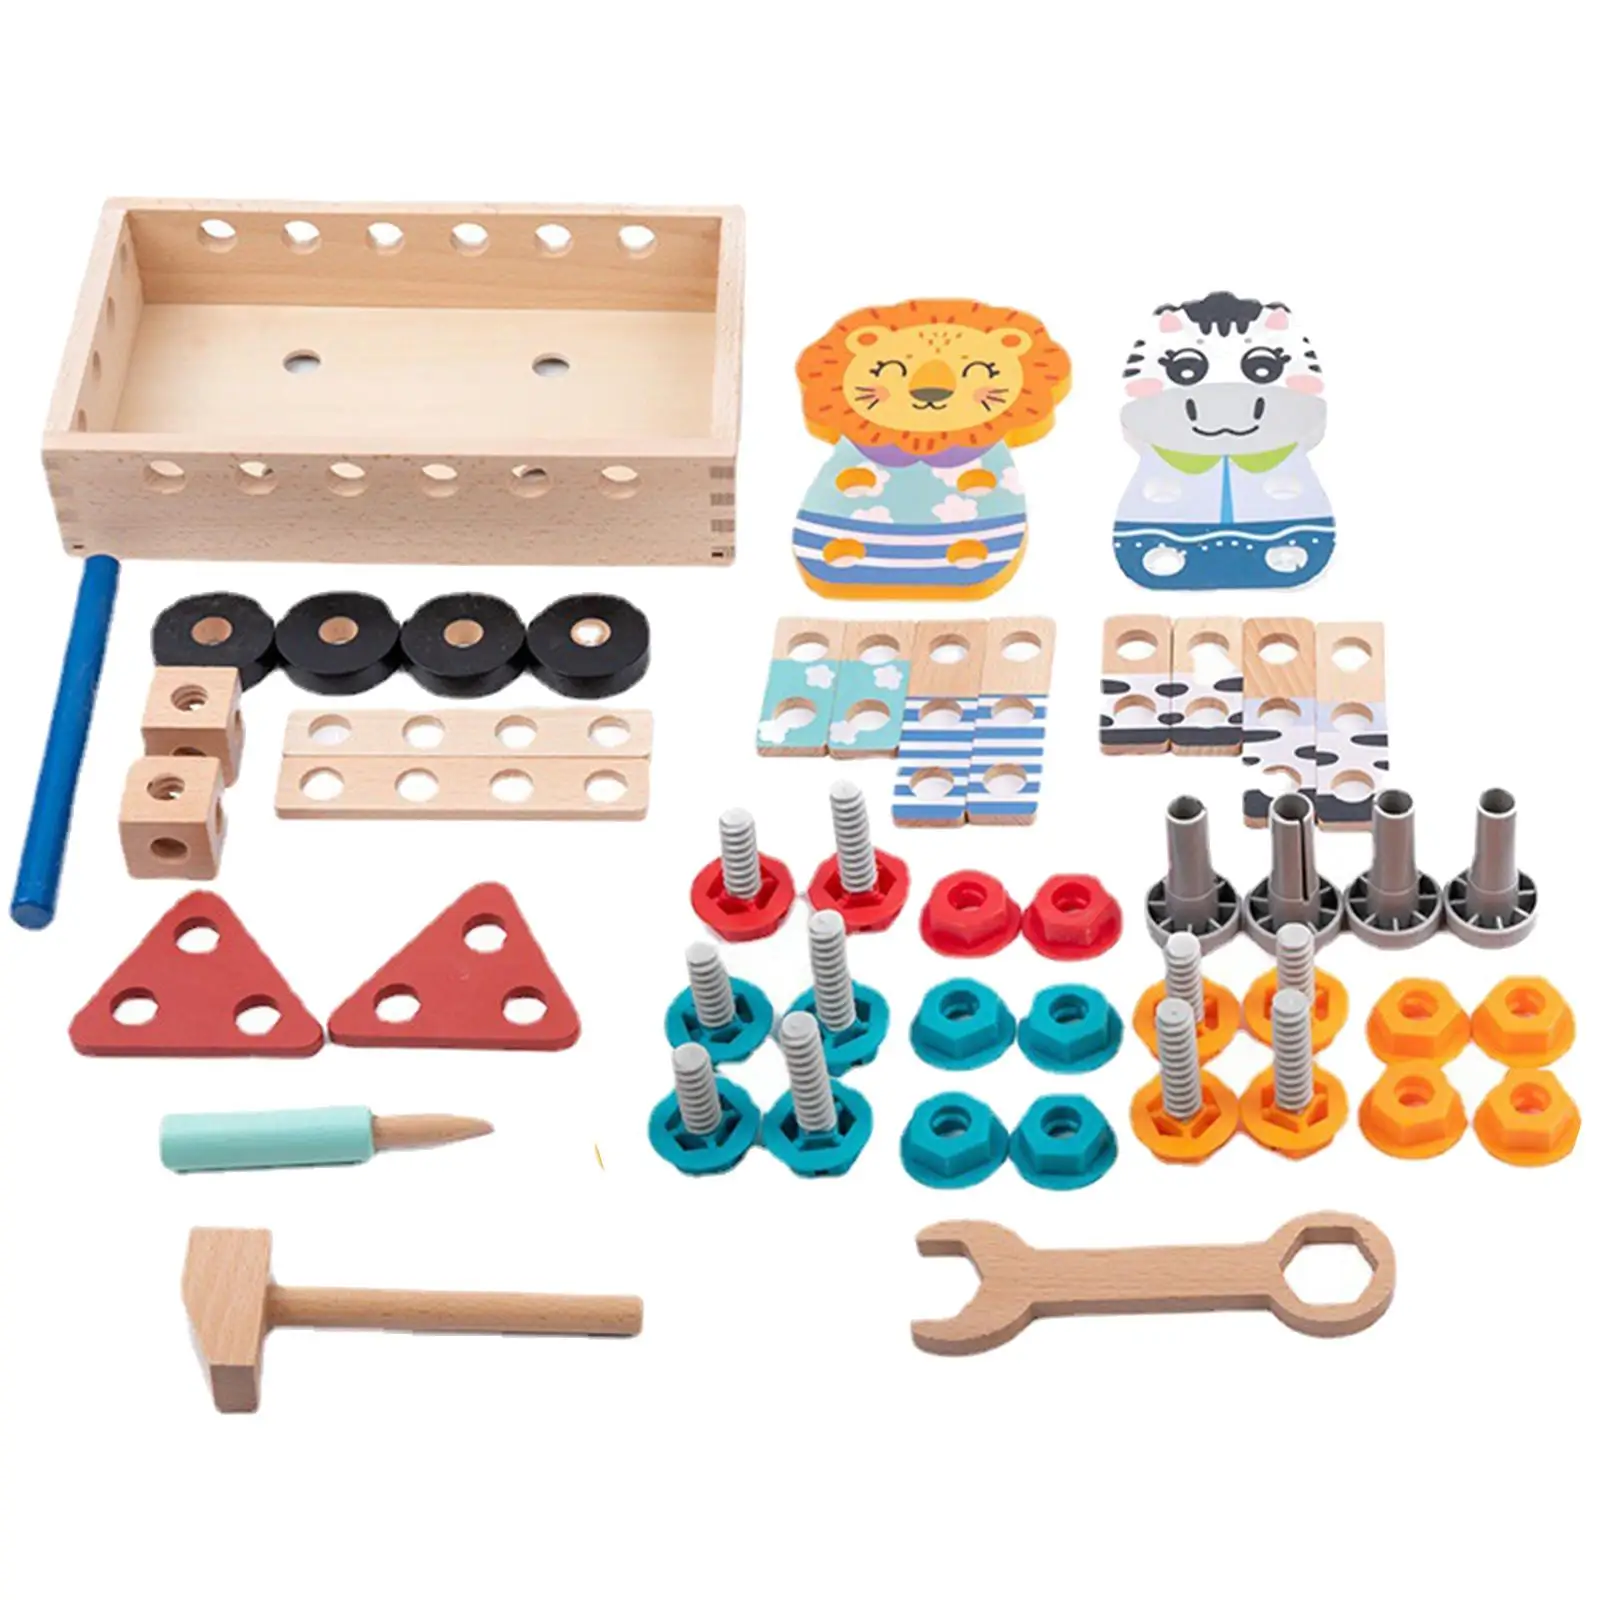 Wooden Tool Set Pretend Game education Learning Indoor Role Play